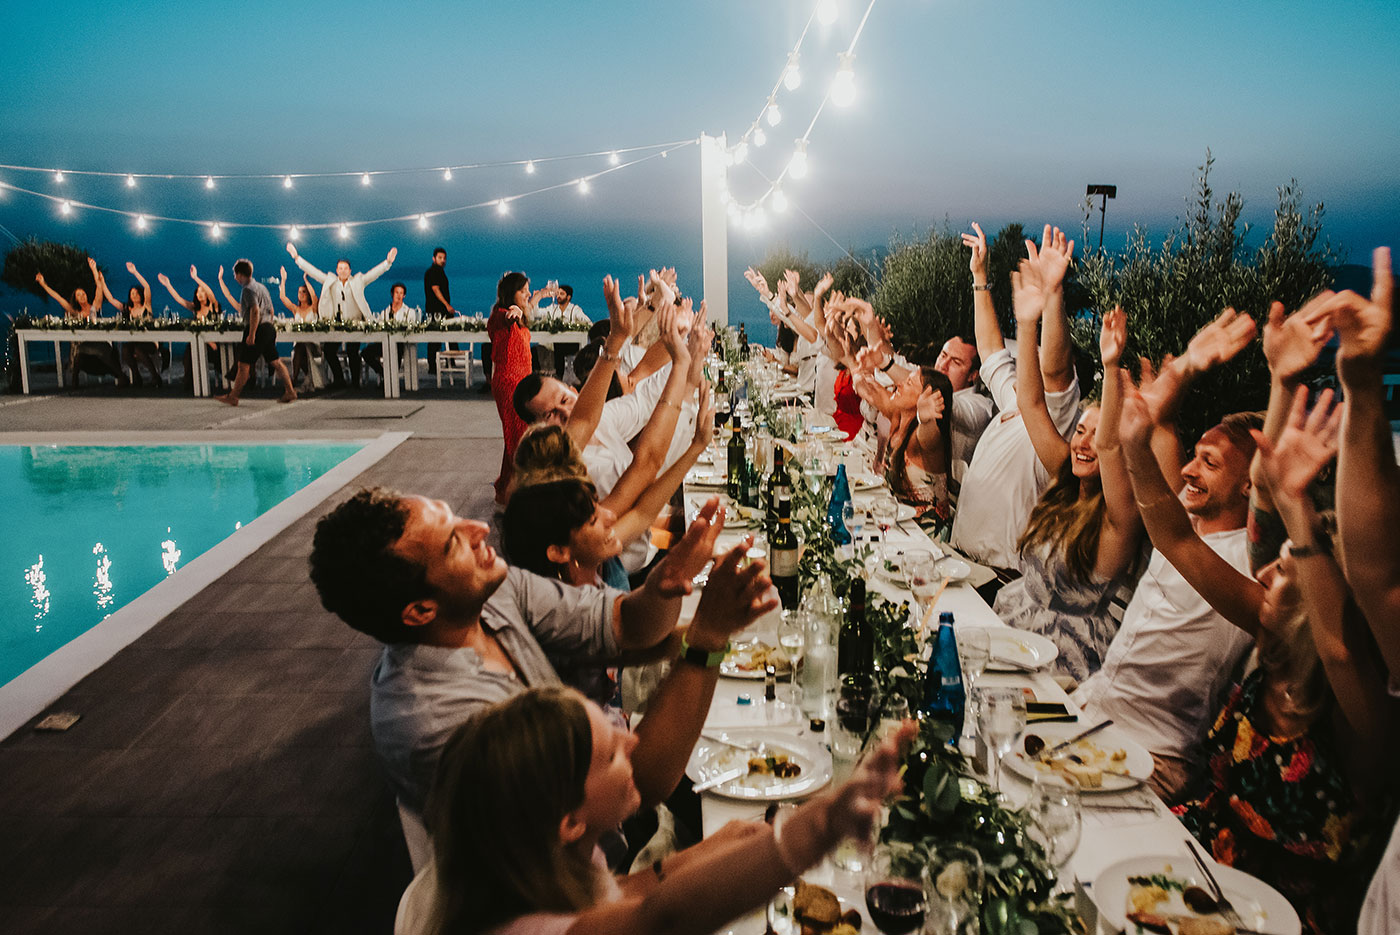 Venue <a href="https://www.wedinspire.com/wedding-venues/santorini/thermes-villas-and-spa/" target="_blank" rel="noopener noreferrer">Thermes Villa and Spa</a> | Photo by <a href="https://www.benwyattphotography.com/" target="_blank" rel="noopener noreferrer">Ben Wyatt Photography</a>